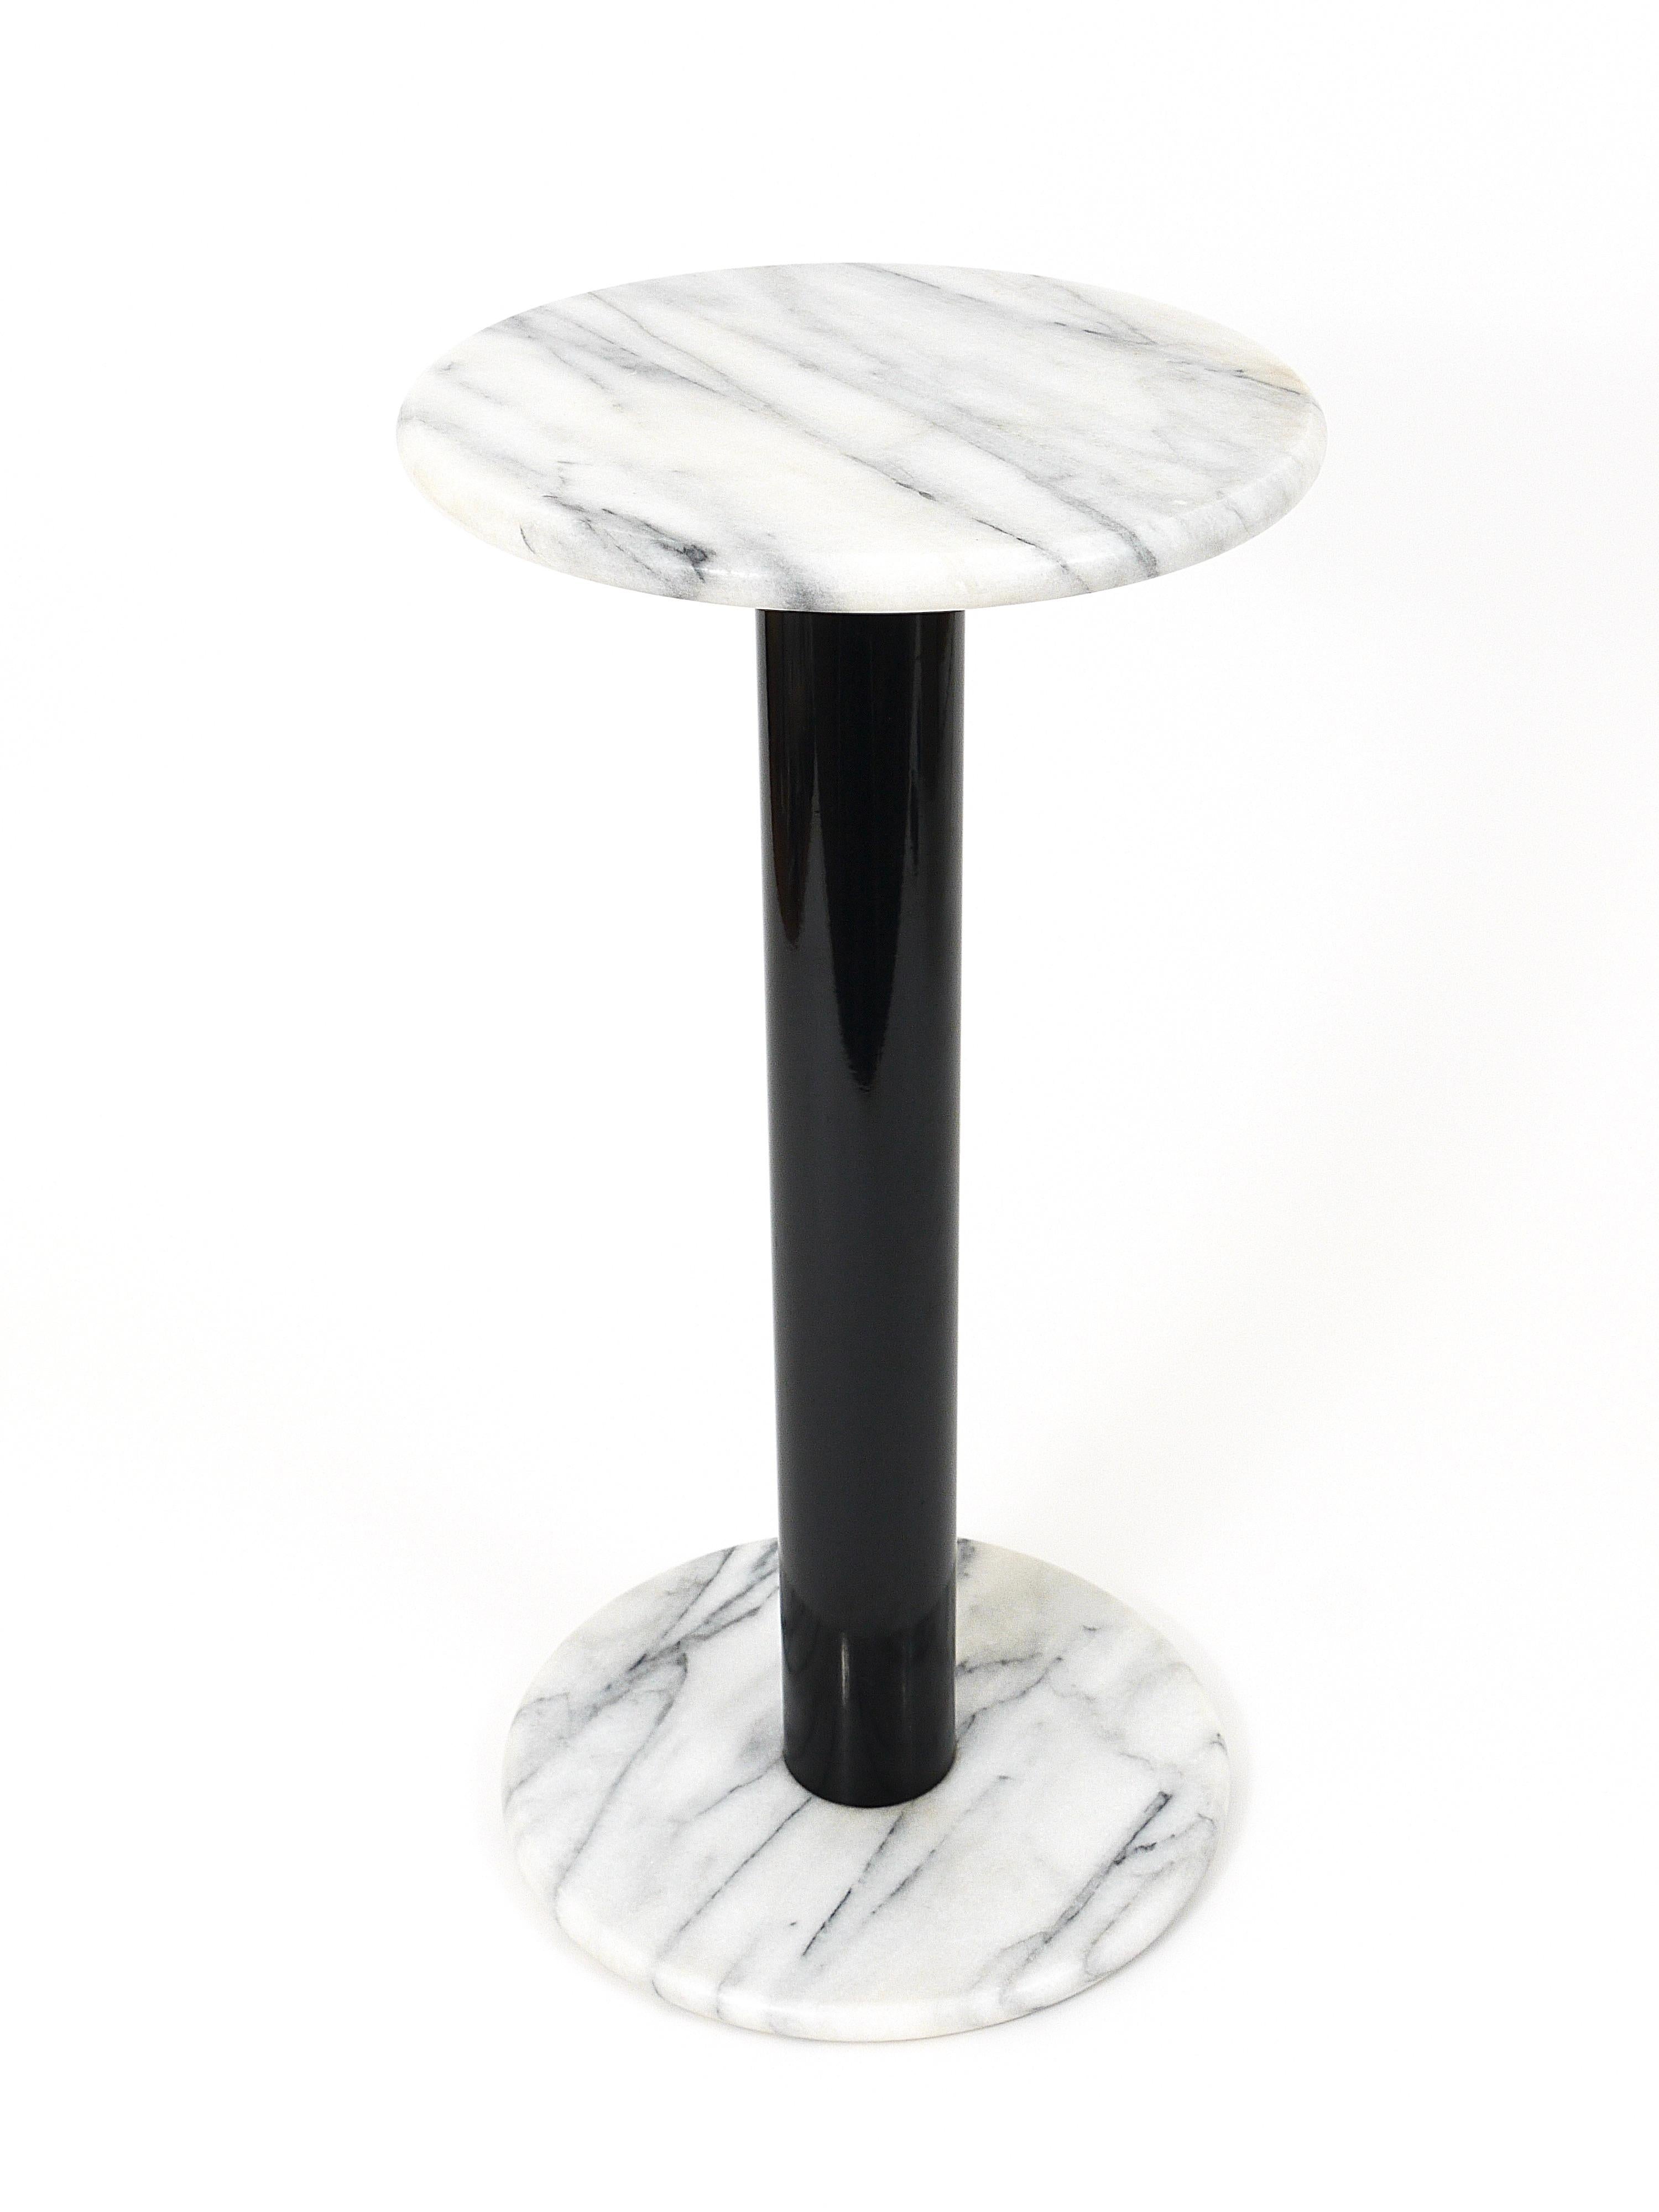 Late 20th Century Postmodern White Carrara Marble Flower Stand Pedestal Table, Italy, 1980s For Sale